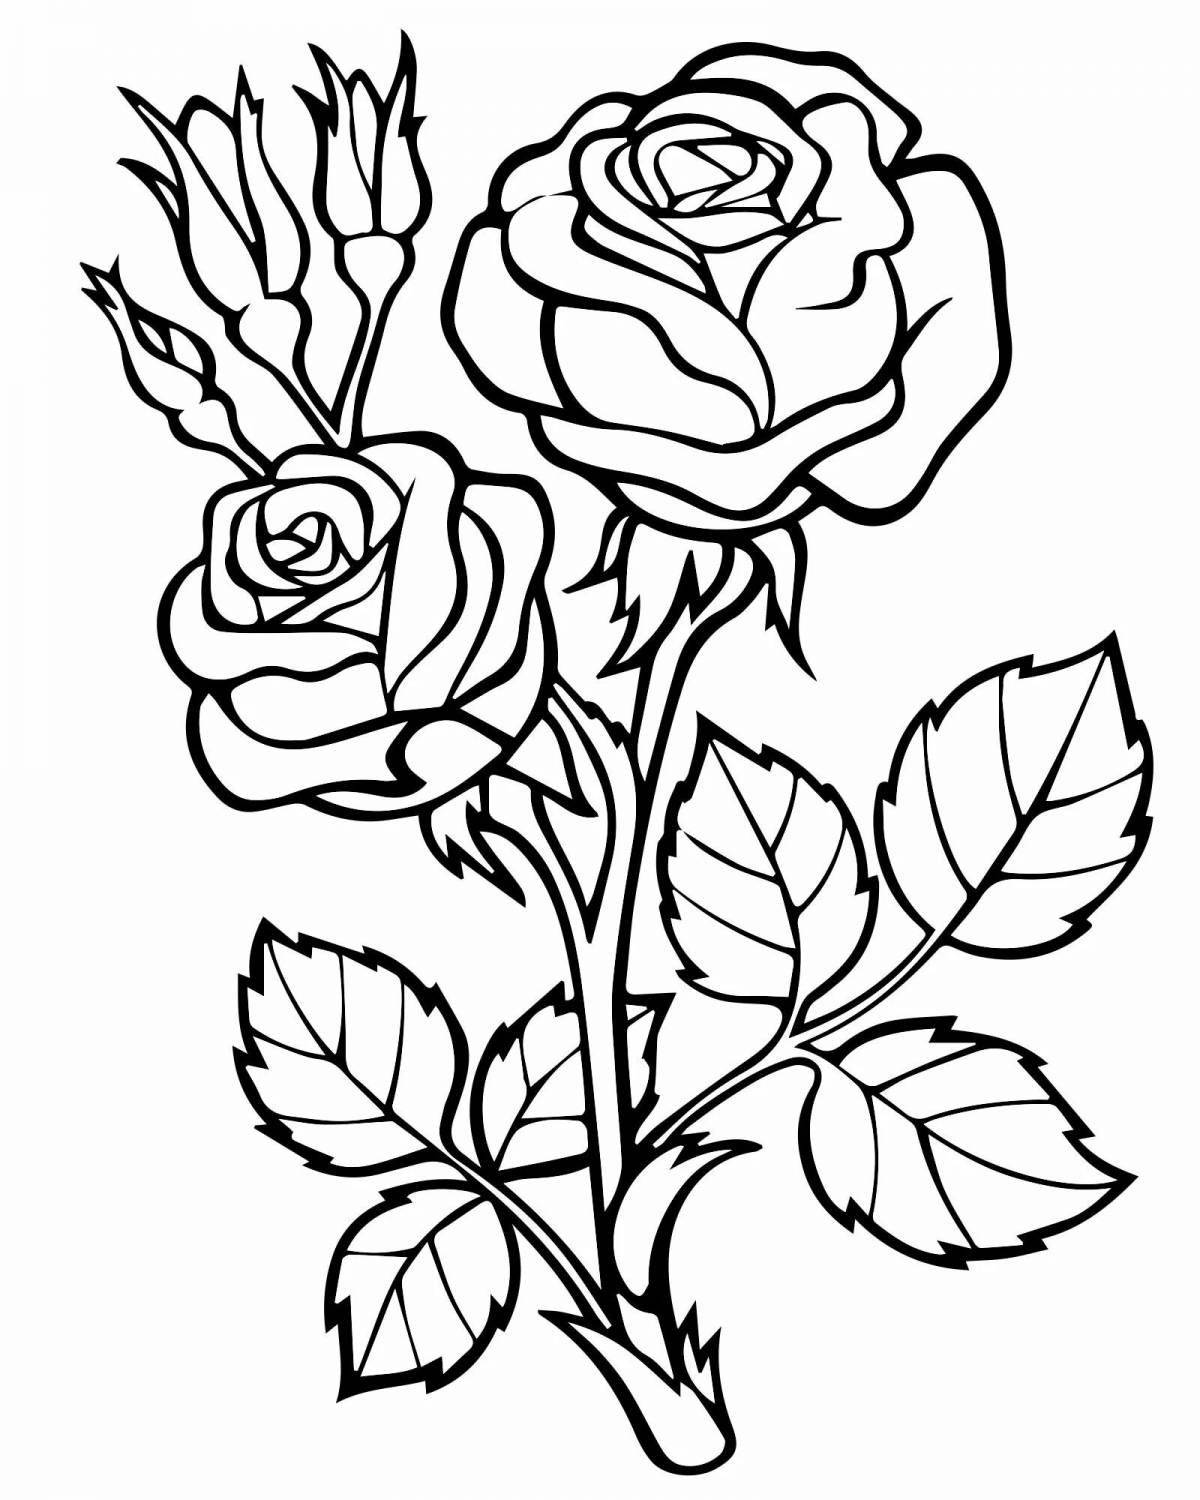 Dreamy rose coloring book for 5-6 year olds